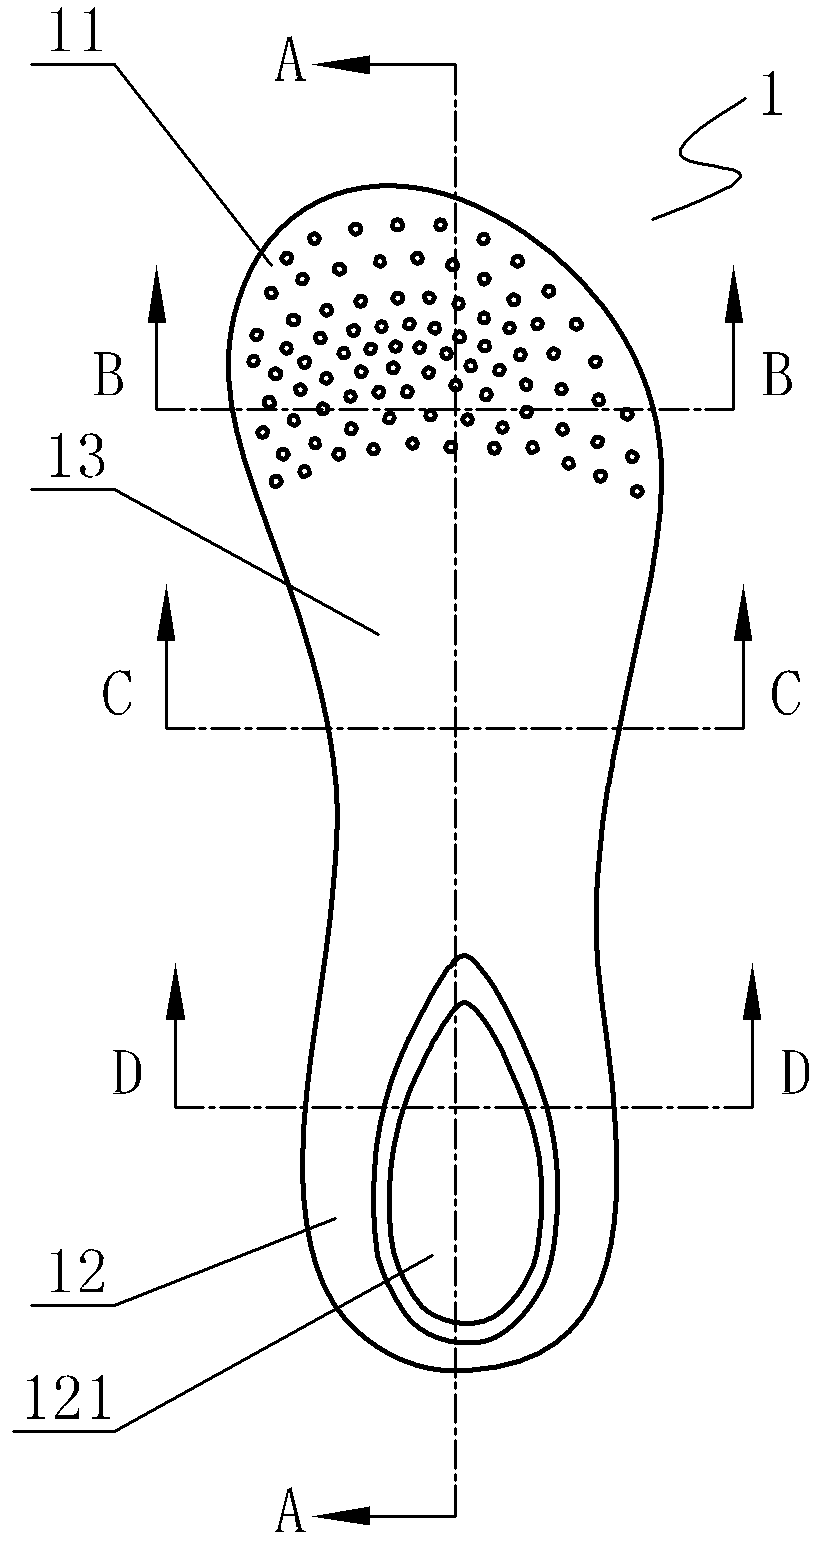 Device placed in shoe and shoe with device